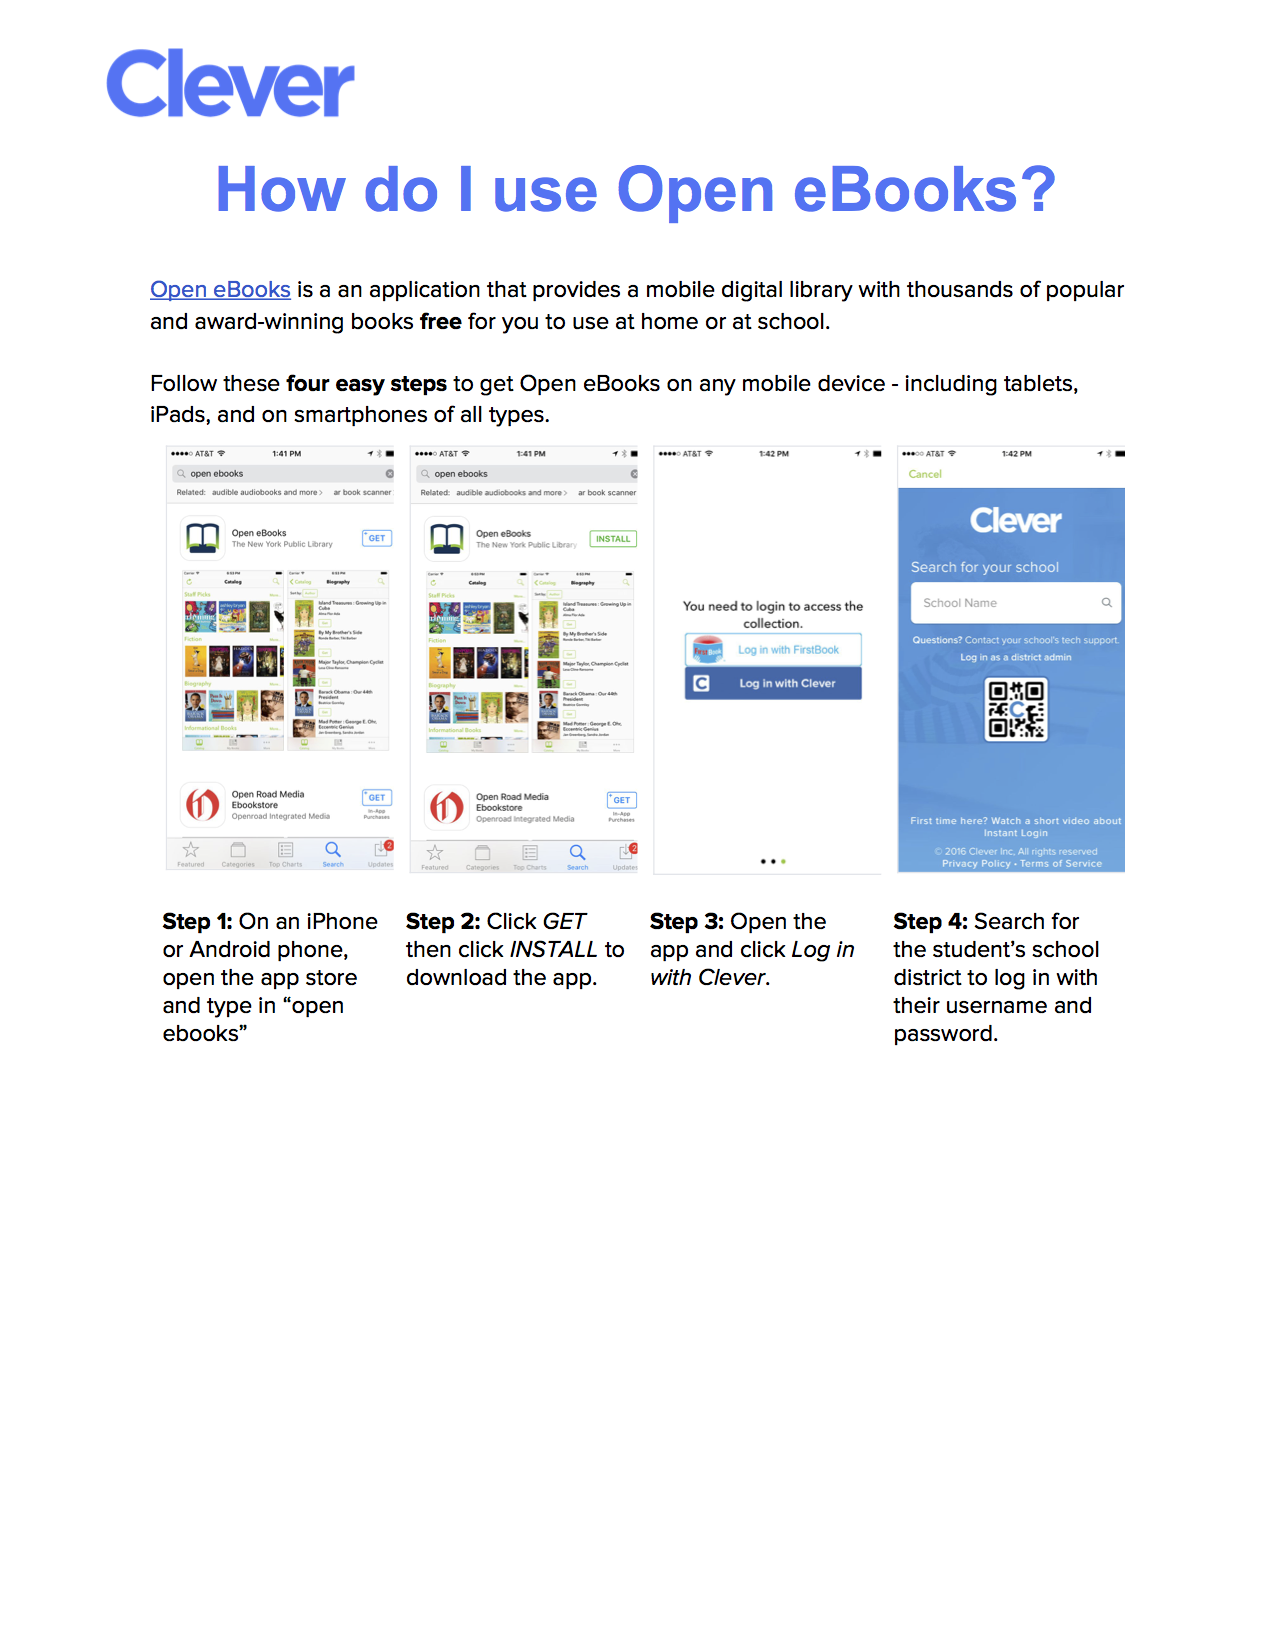 Directions on using Open eBooks through Clever.